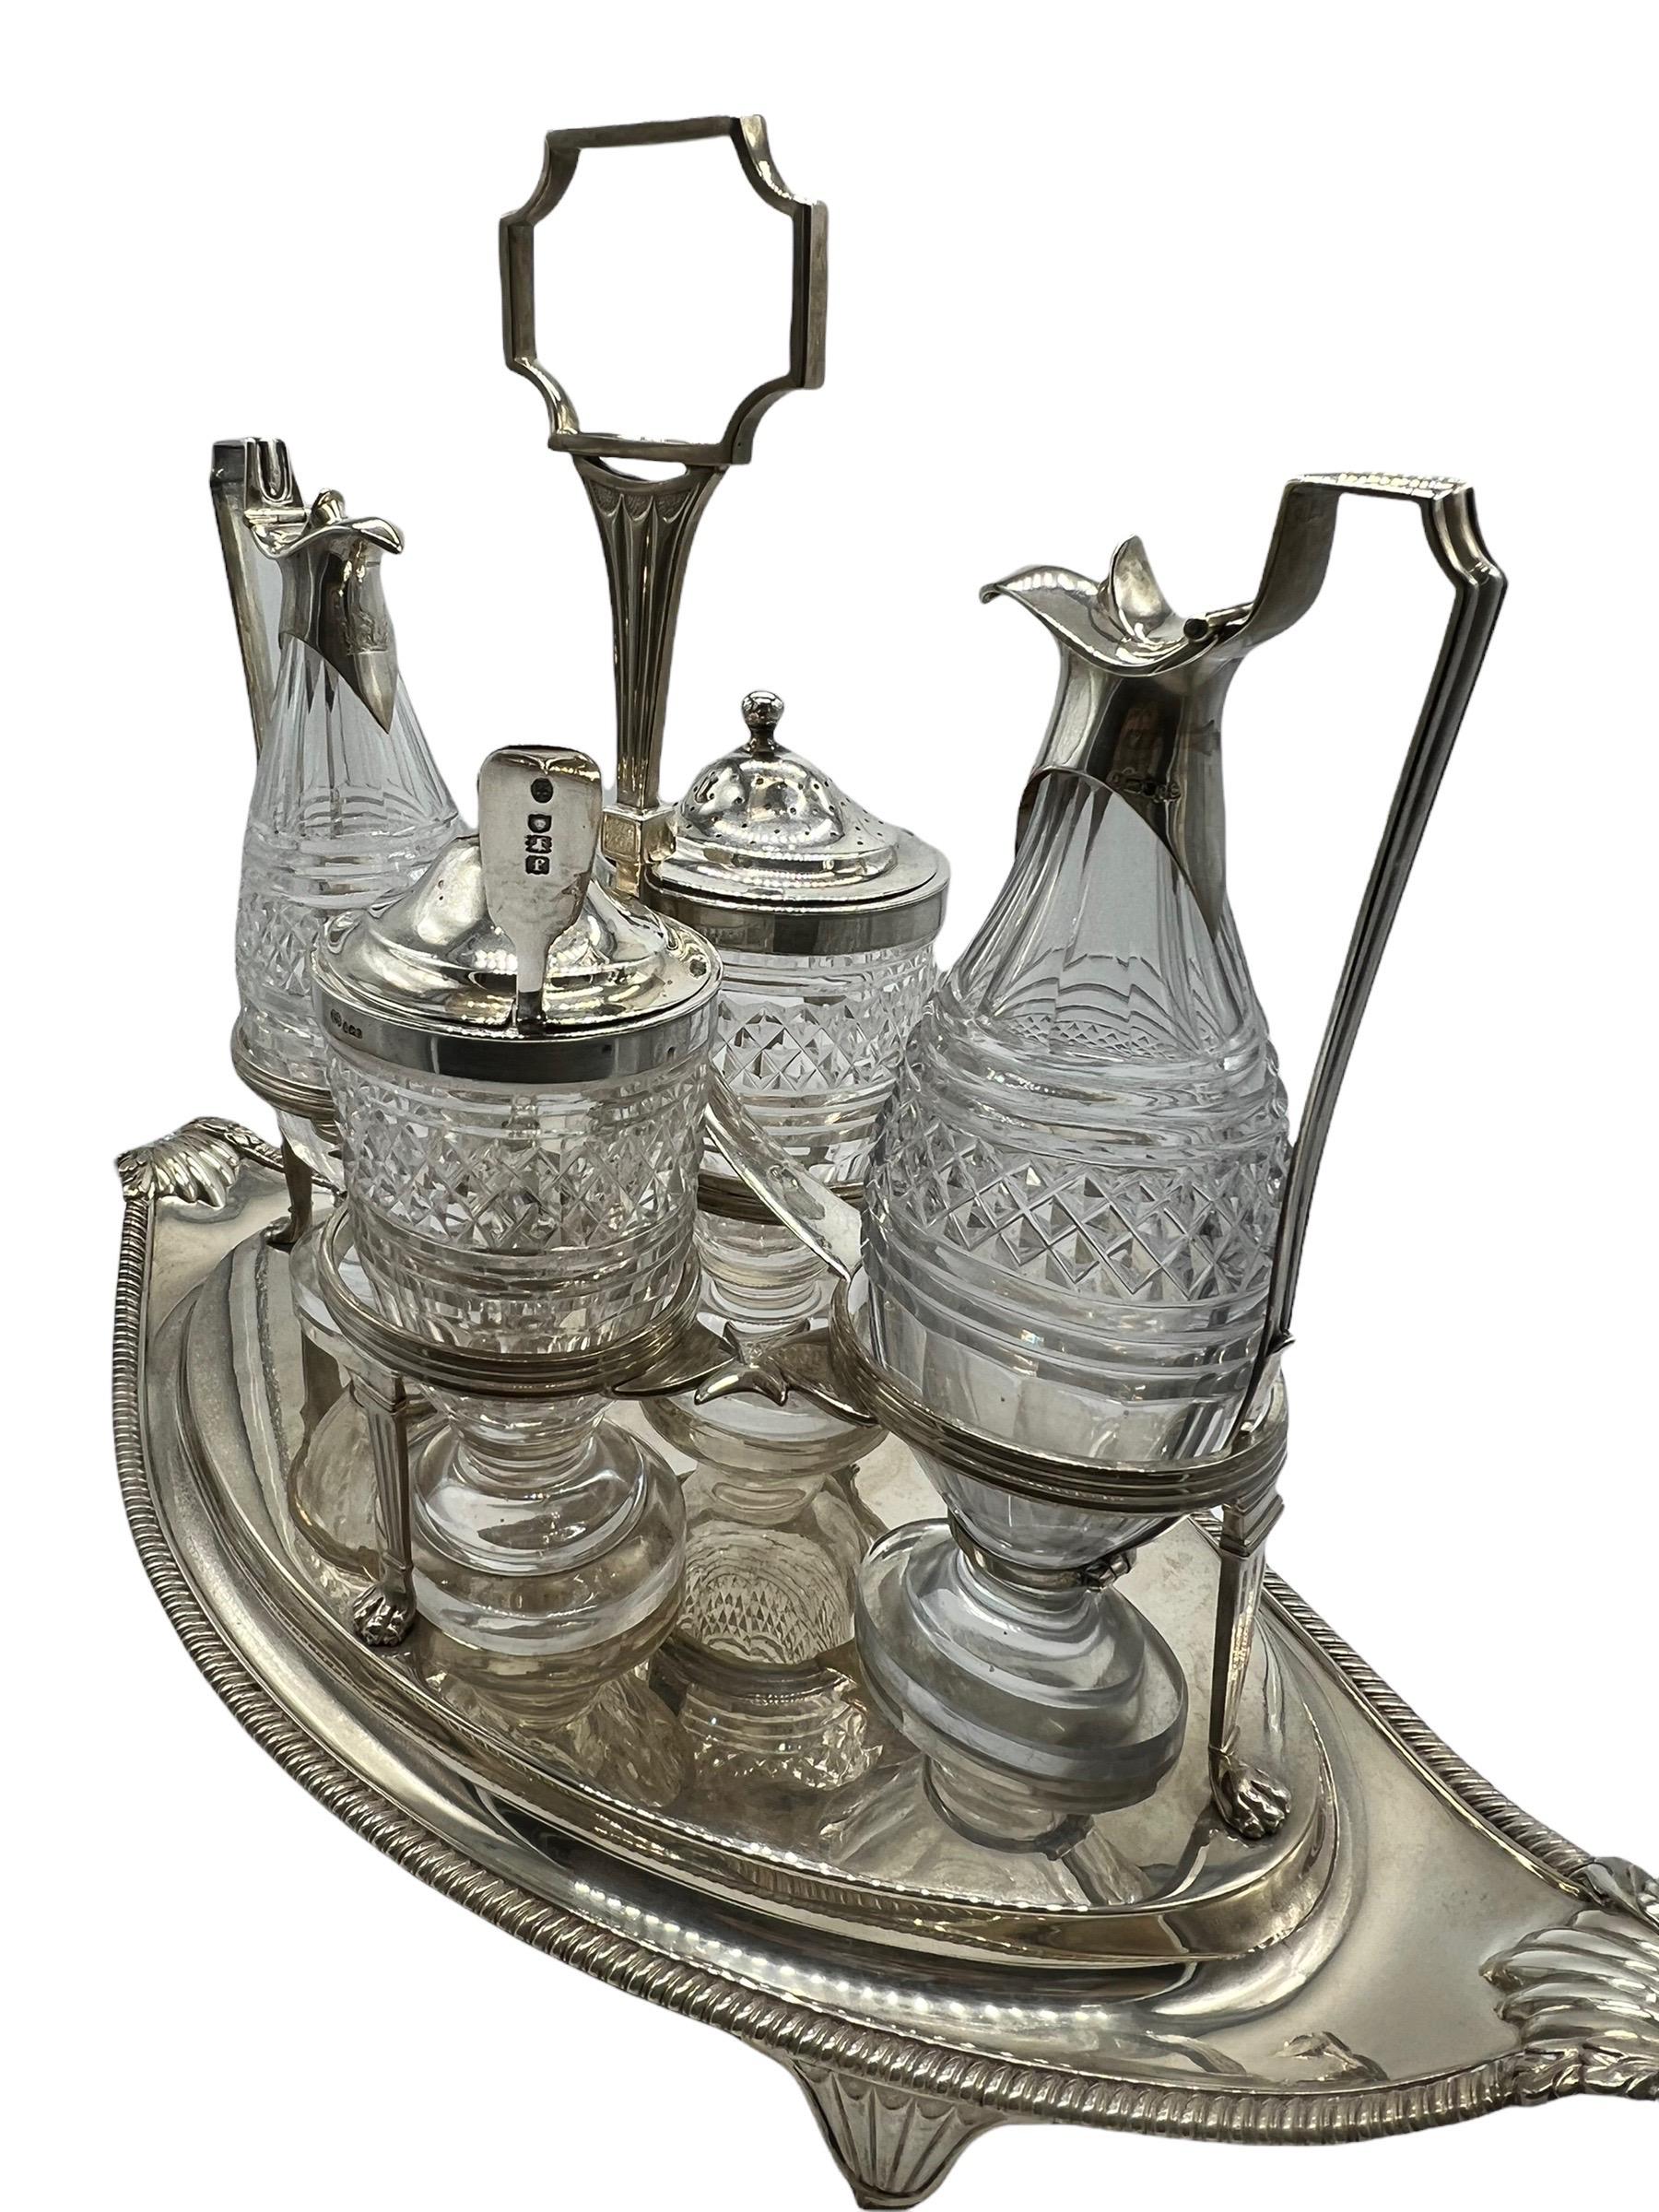 Neoclassical Sterling Silver and Cut-Glass Cruet Set by Paul Storr, Early 1800s For Sale